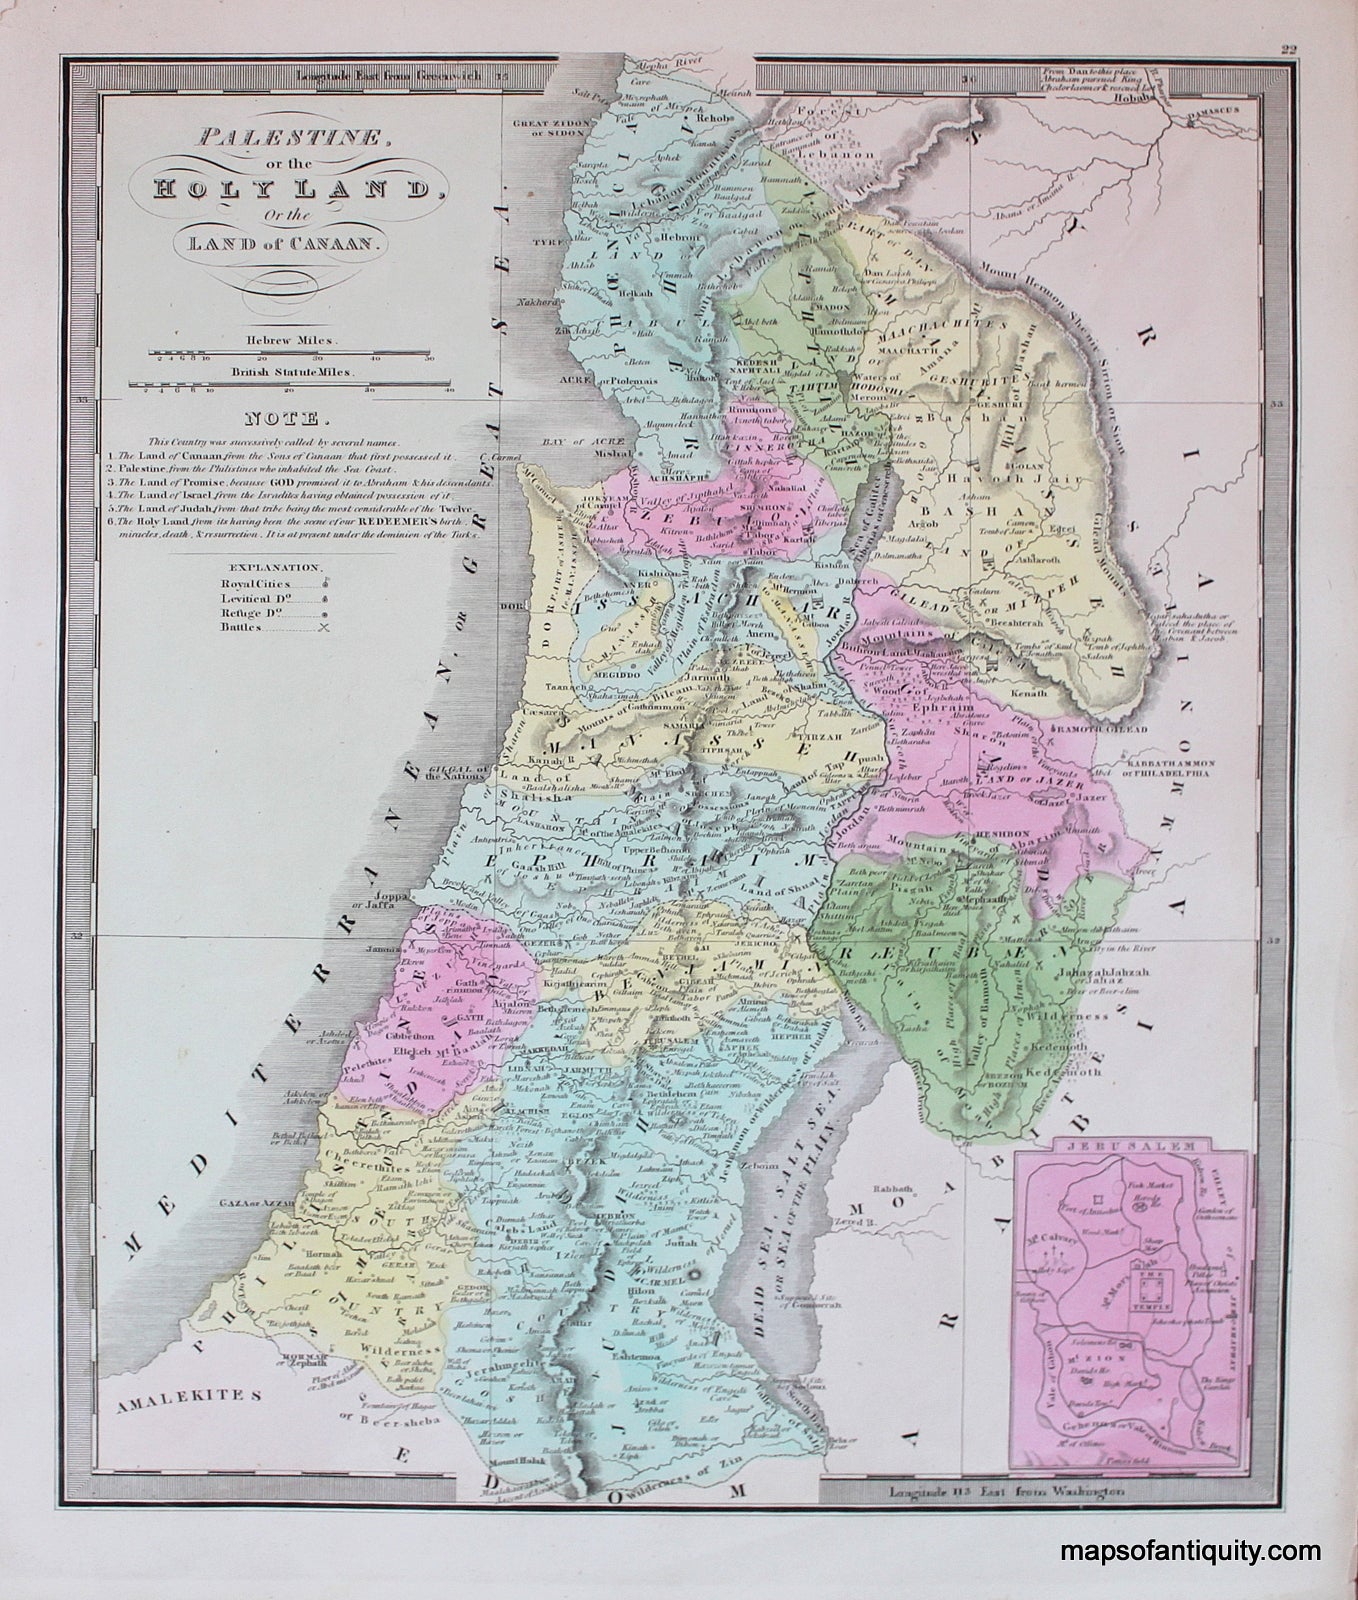 Antique-Hand-Colored-Map-Palestine-or-the-Holy-Land-or-the-Land-of-Canaan.**********-Middle-East-and-Holy-Land--1848-Jeremiah-Greenleaf-Maps-Of-Antiquity